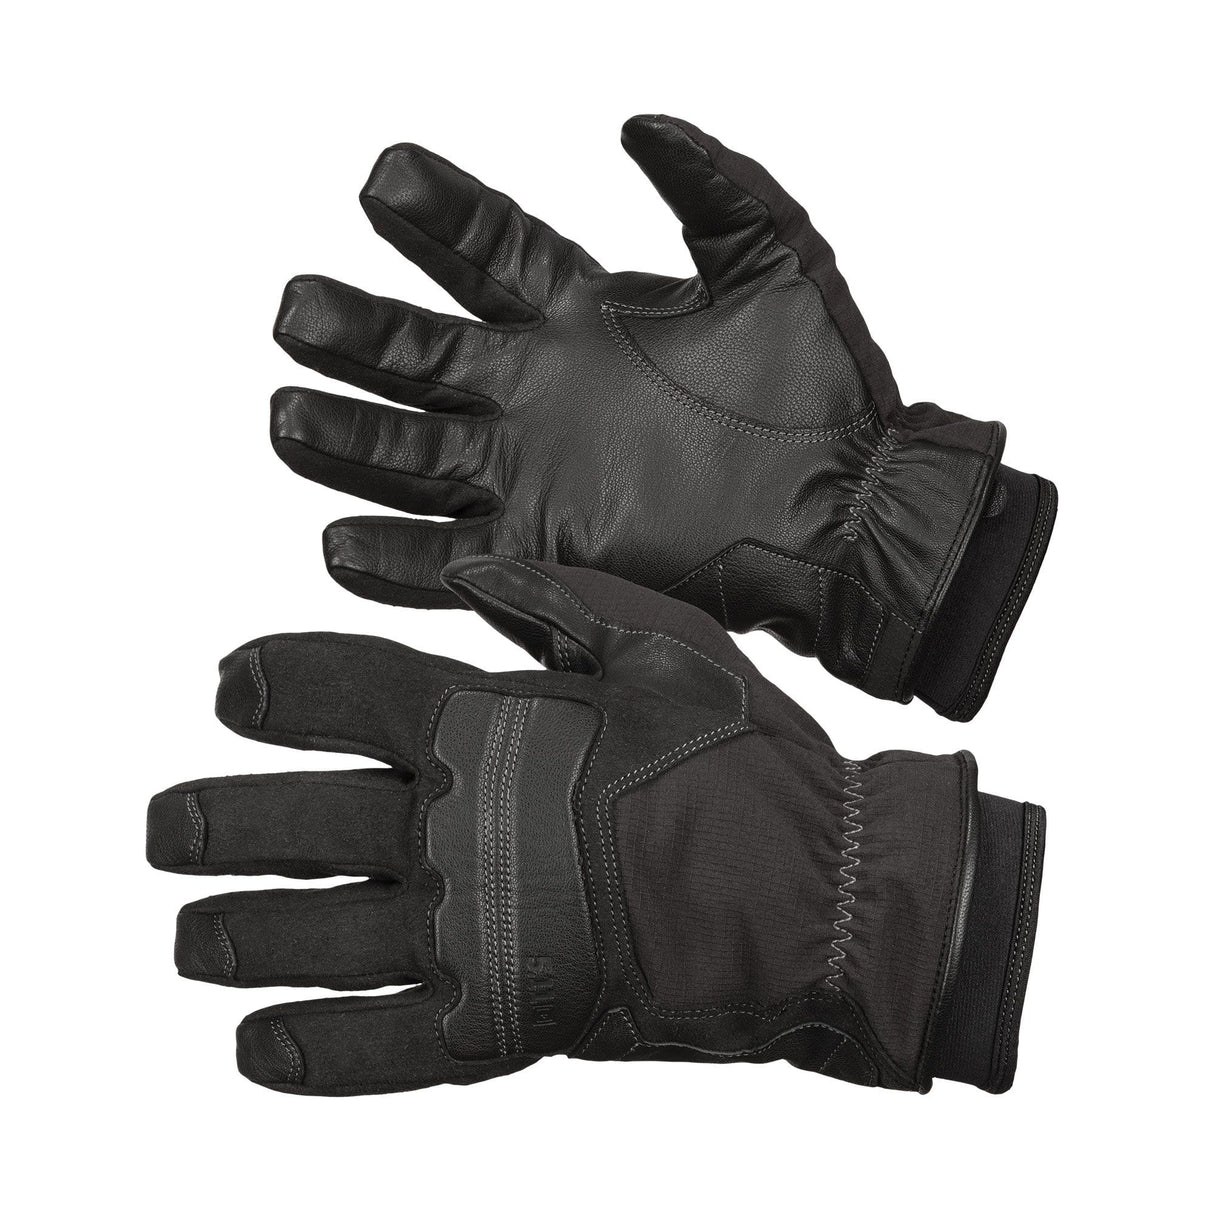 CALDUS INSULATED GLOVE - 5.11 Tactical Finland Store